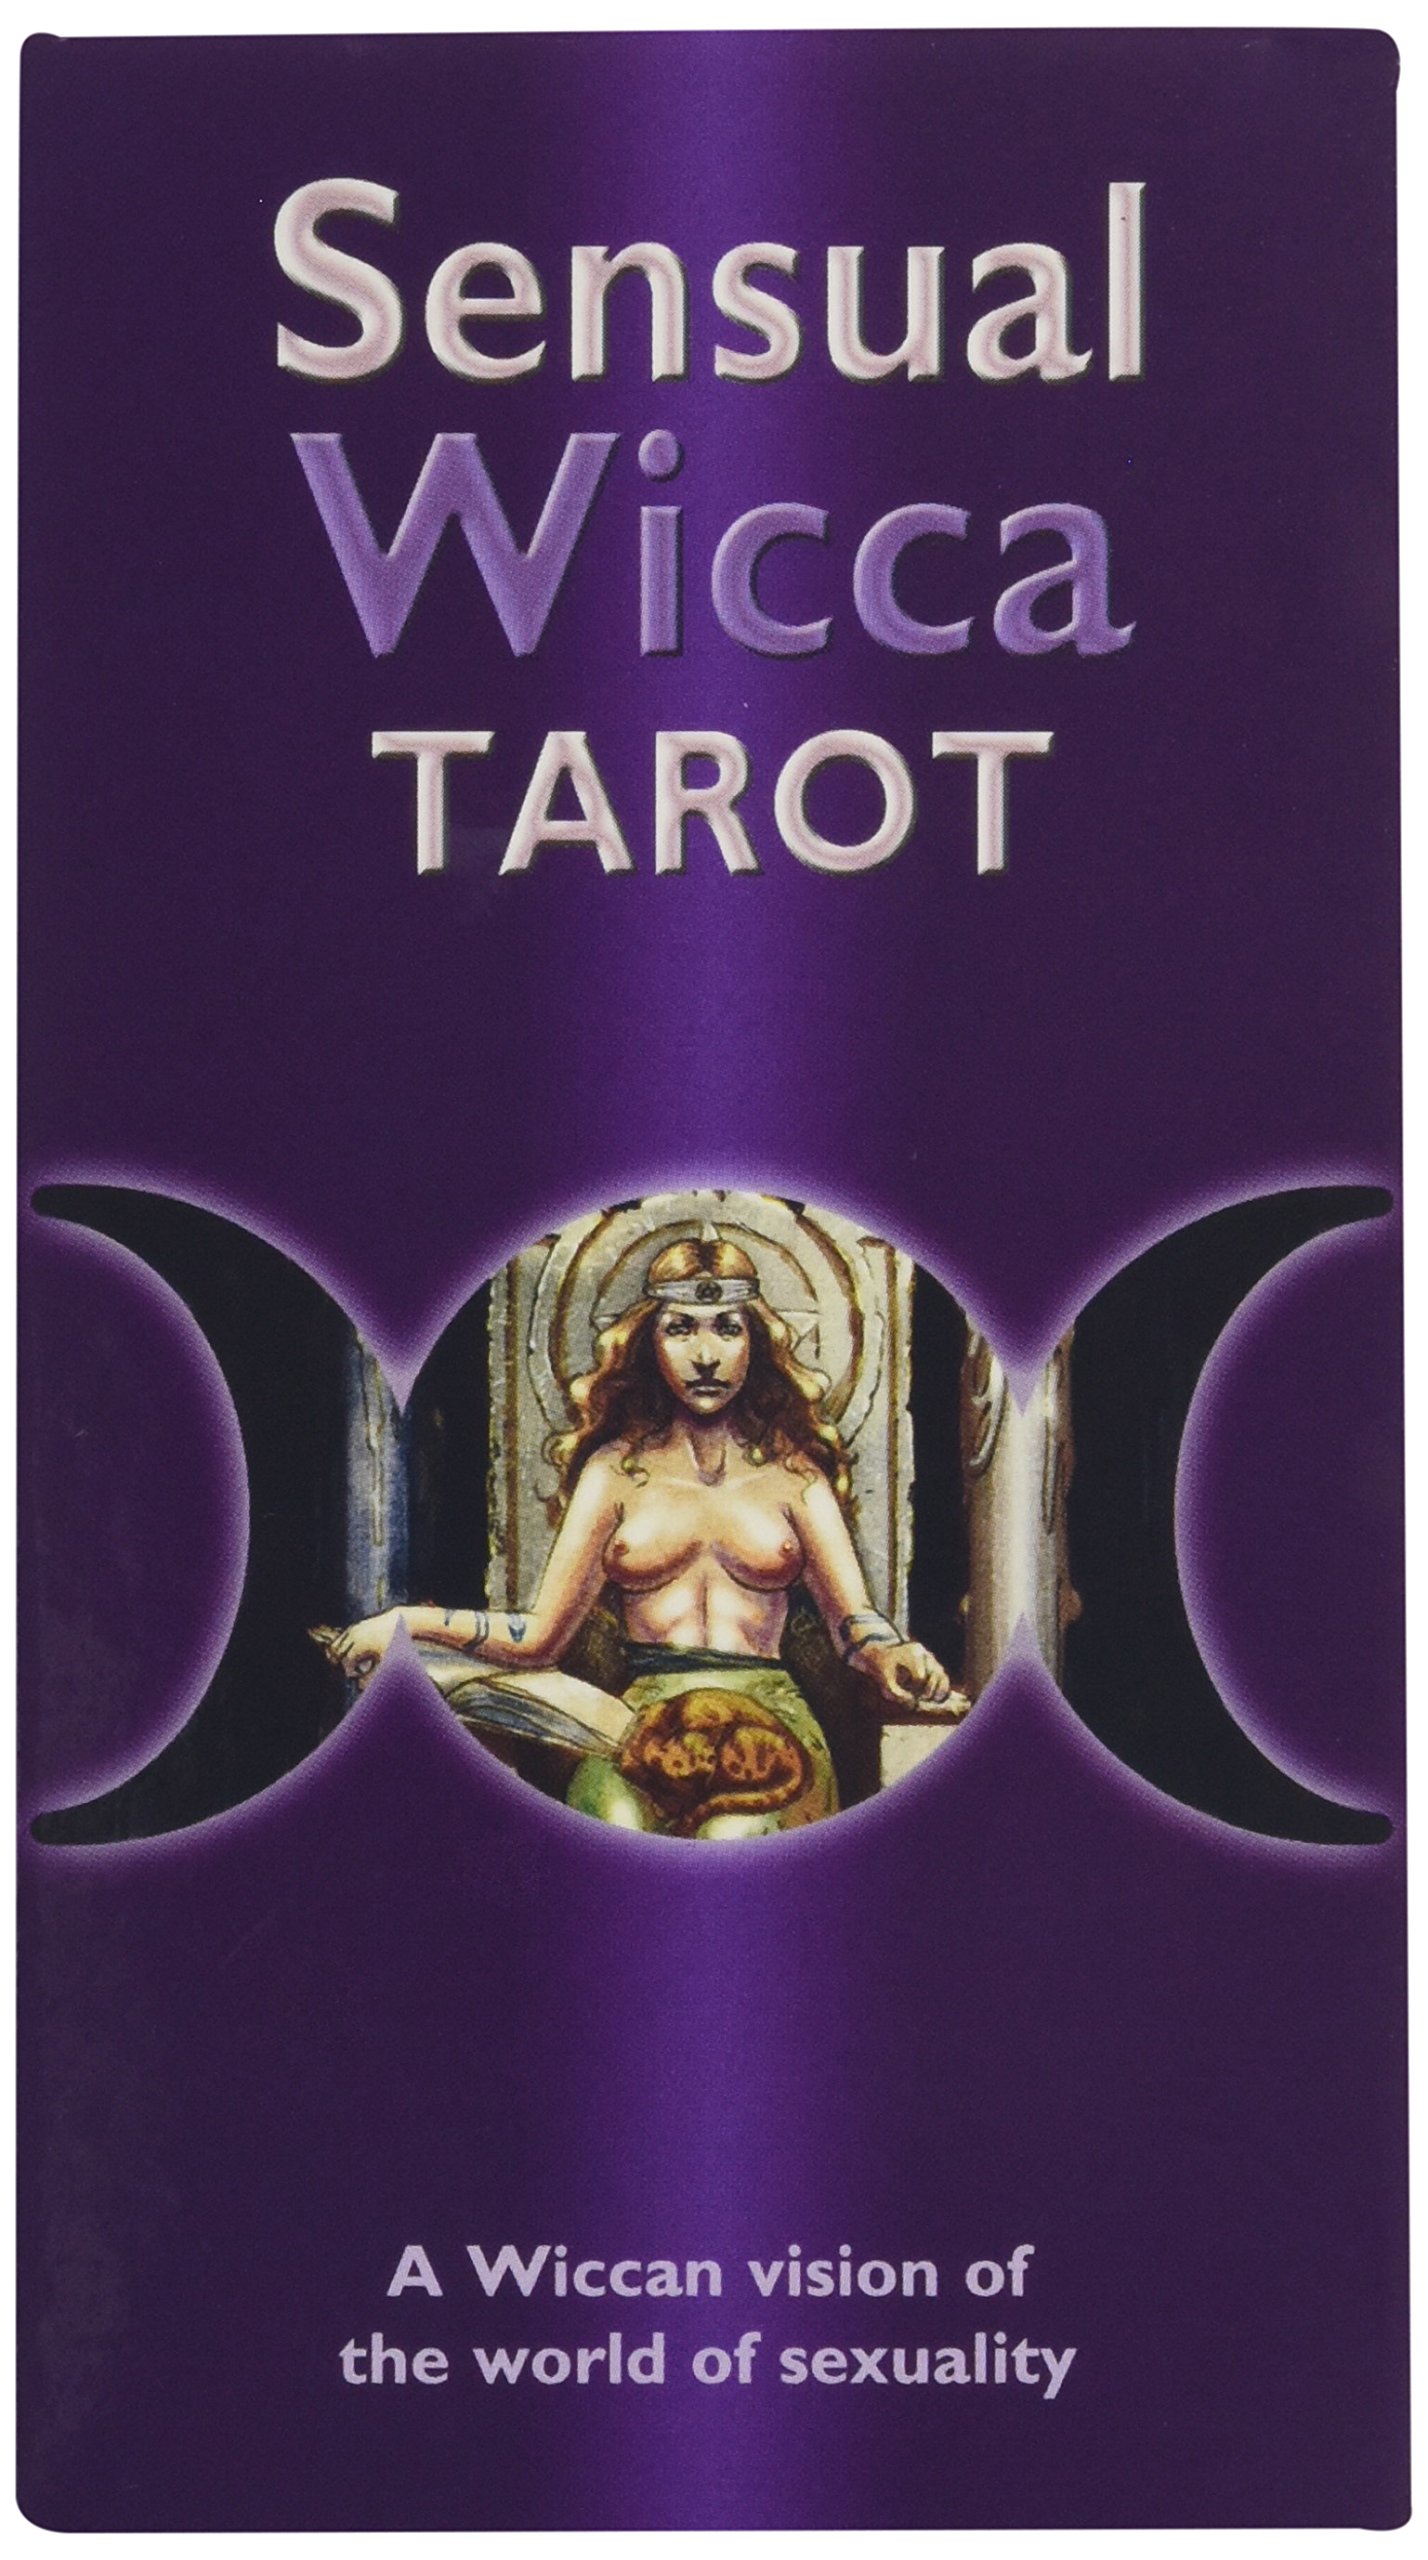 Young B. reccomend Erotic wicca stories